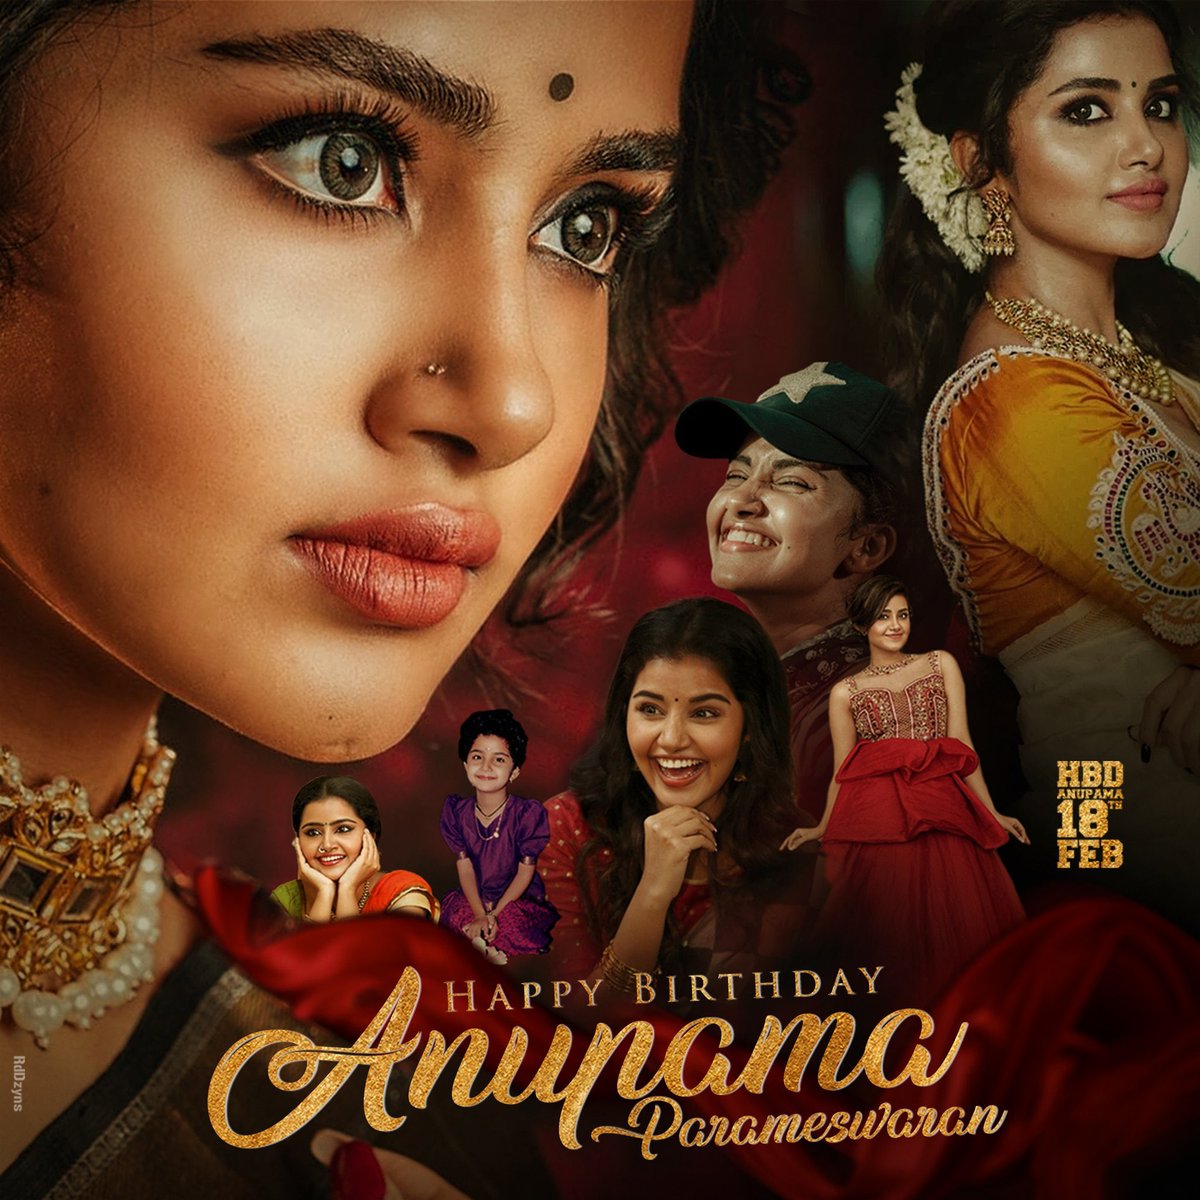 Wishing you many more happy returns of the day Angel @anupamahere Long Live Dear 😍😍😍 All the very best for your future projects. We are there to support you... Love you always 😍😍